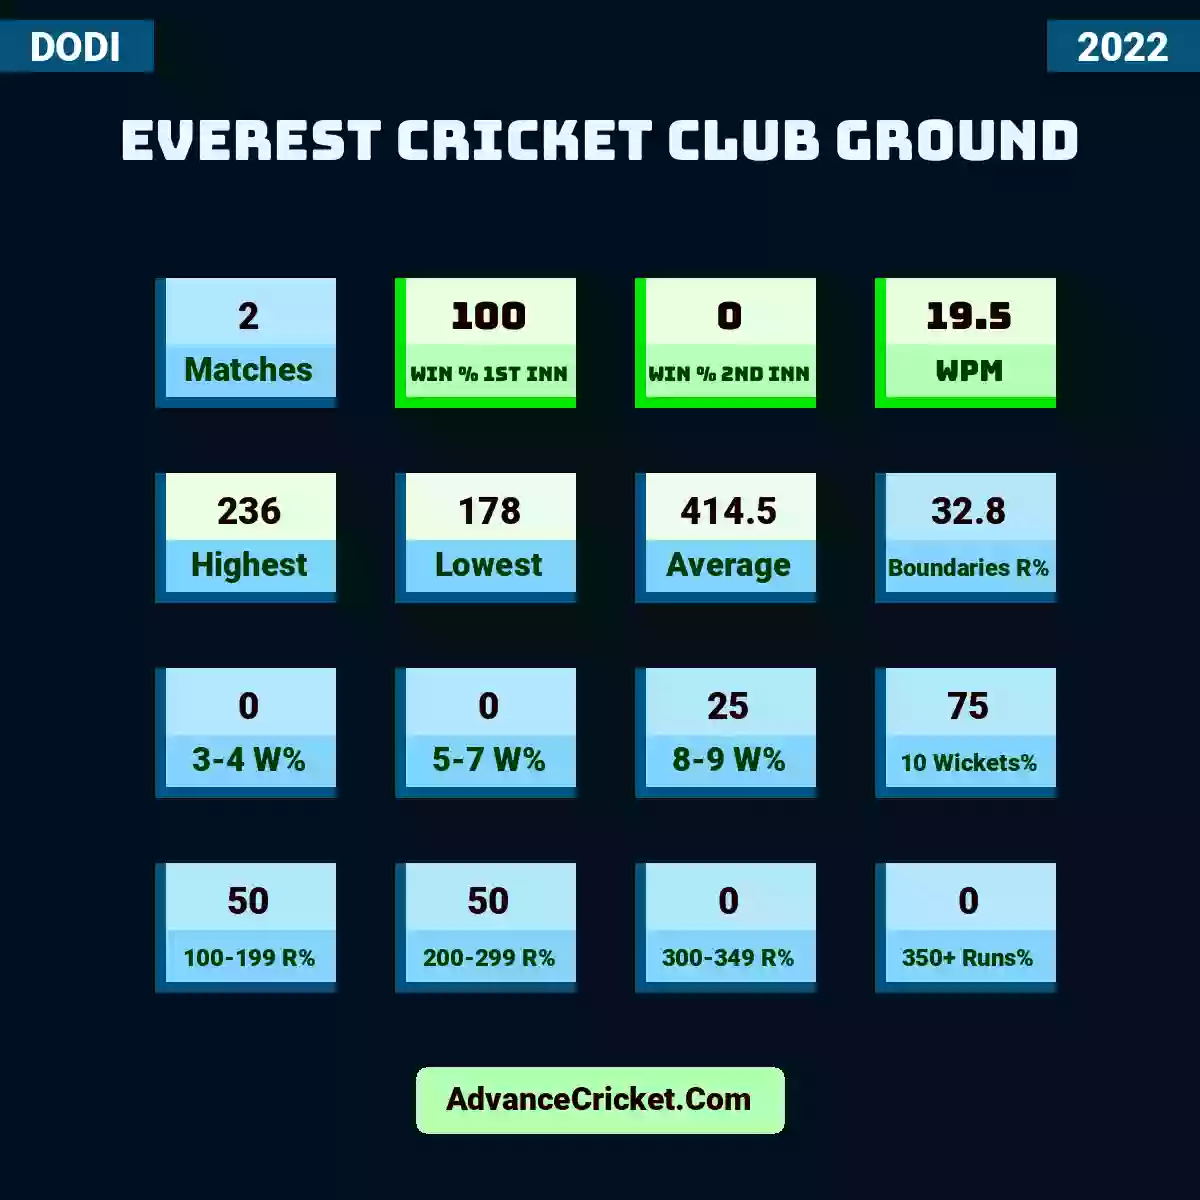 Image showing Everest Cricket Club Ground with Matches: 2, Win % 1st Inn: 100, Win % 2nd Inn: 0, WPM: 19.5, Highest: 236, Lowest: 178, Average: 414.5, Boundaries R%: 32.8, 3-4 W%: 0, 5-7 W%: 0, 8-9 W%: 25, 10 Wickets%: 75, 100-199 R%: 50, 200-299 R%: 50, 300-349 R%: 0, 350+ Runs%: 0.